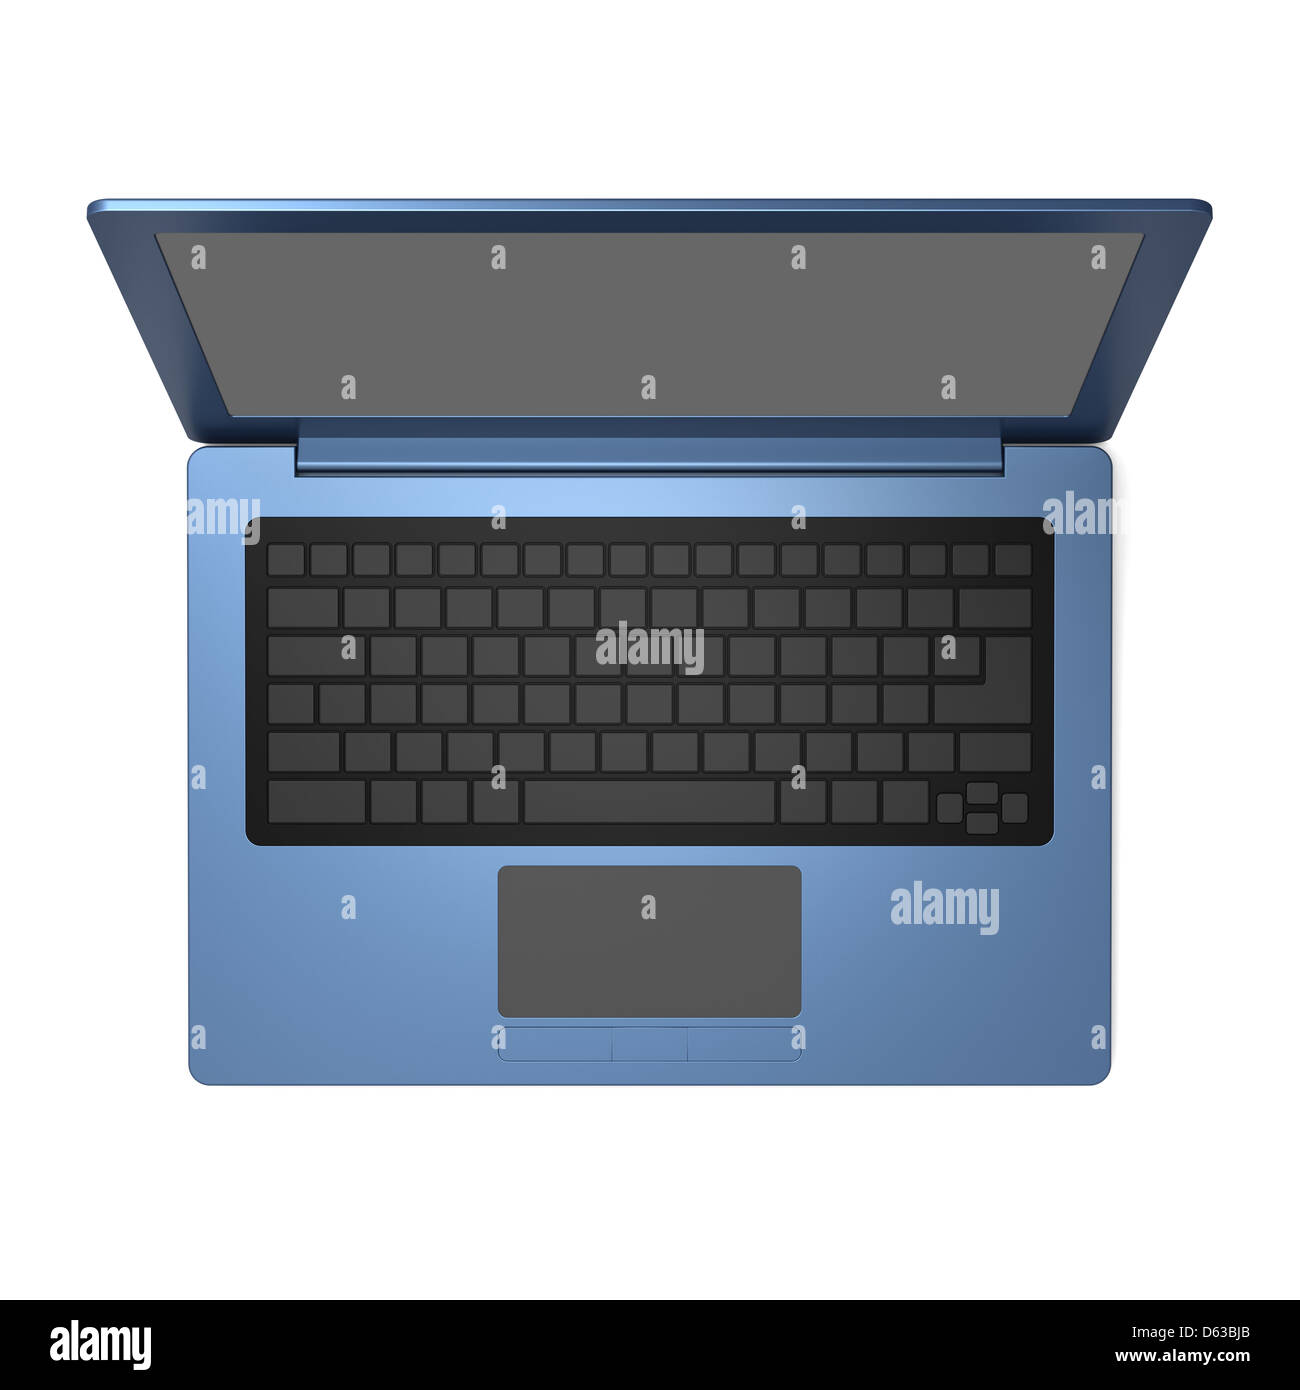 3D model of blue laptop with blank keyboard and simple design on white background Stock Photo